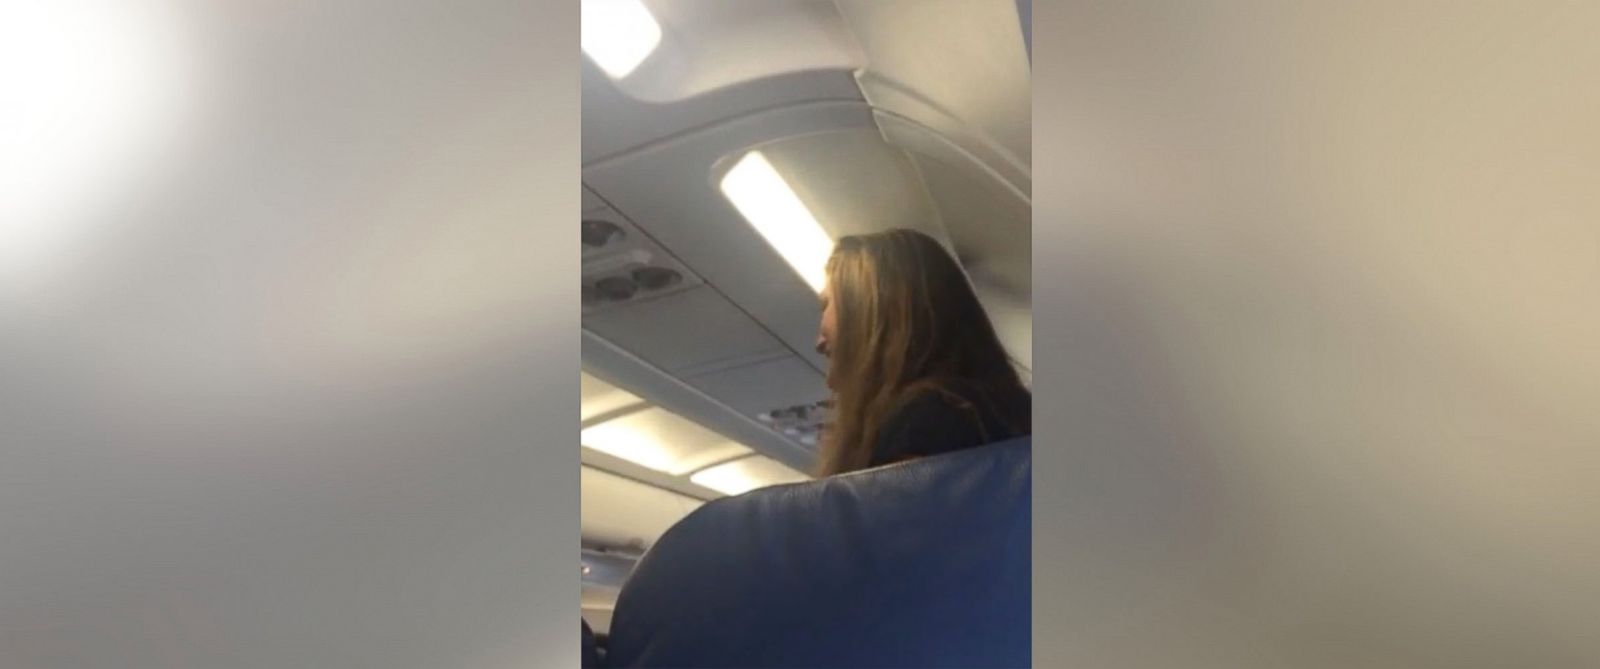 Woman Gets Booted Off Flight, Prompting Fellow Passengers to Boo Crew ...